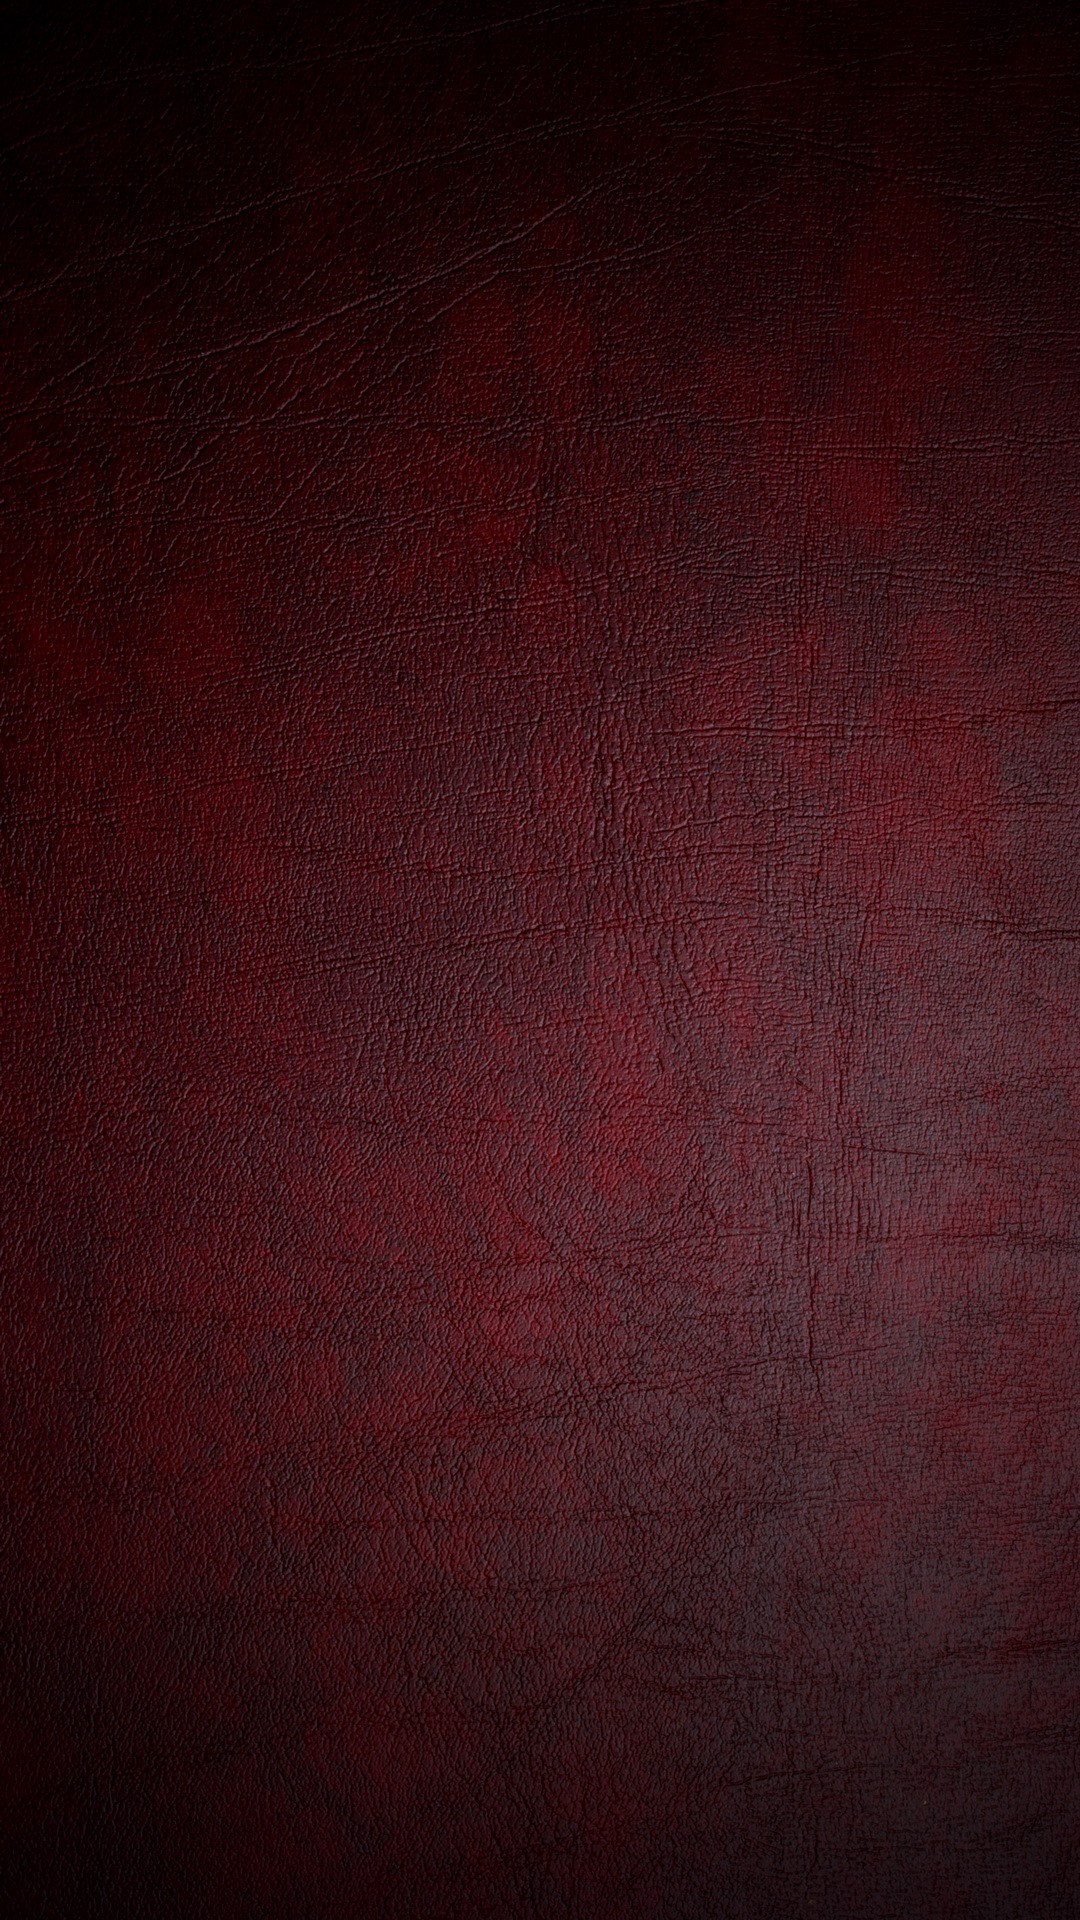 Leather Red  Wallpaper  1080x1920 